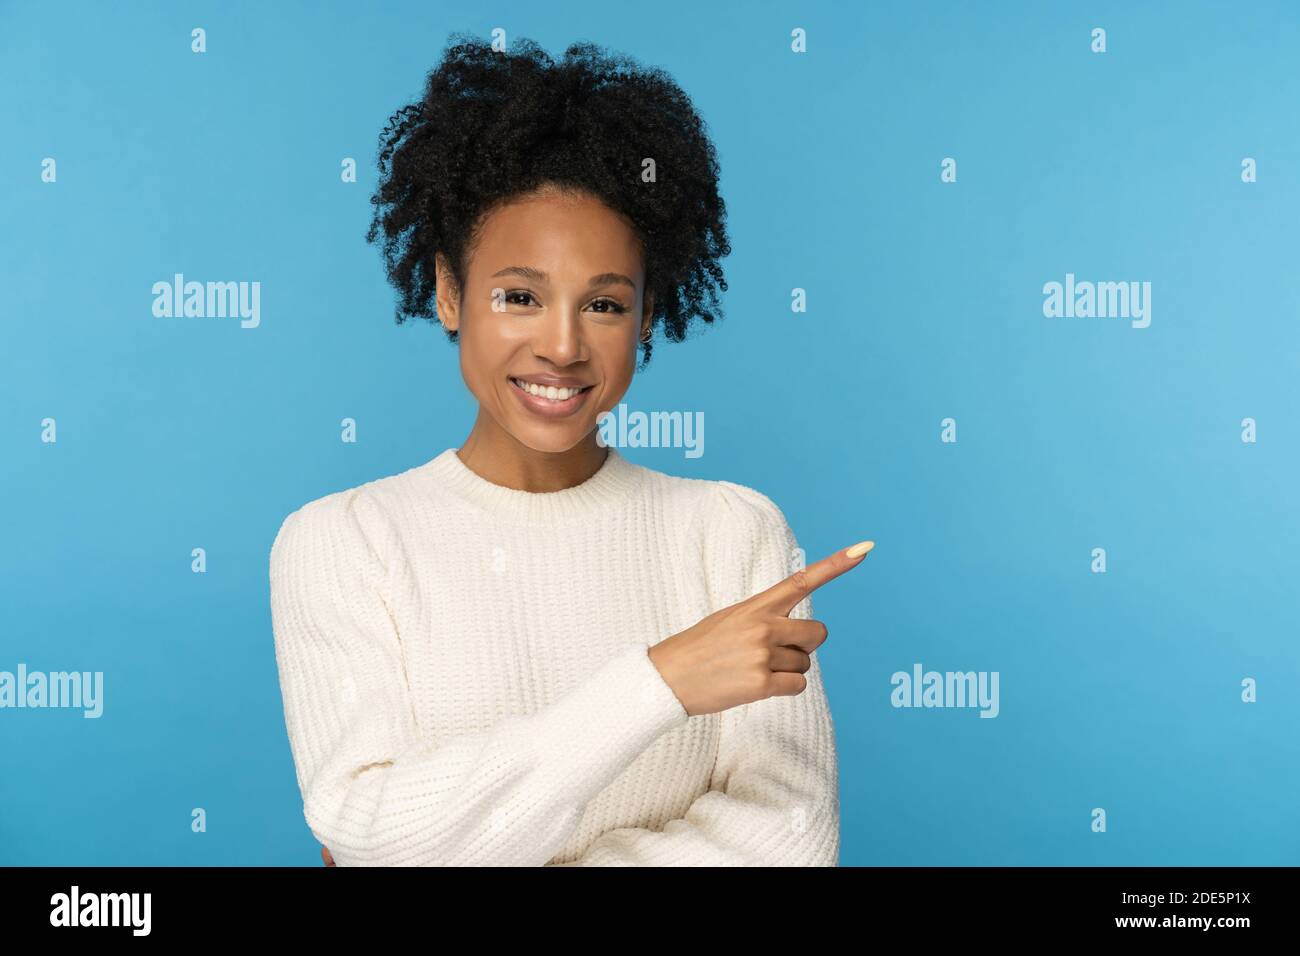 Smiling dark skinned woman with curly hair wear white jumper pointing with finger, showing blank copy space for advertising, offering, product, promot Stock Photo